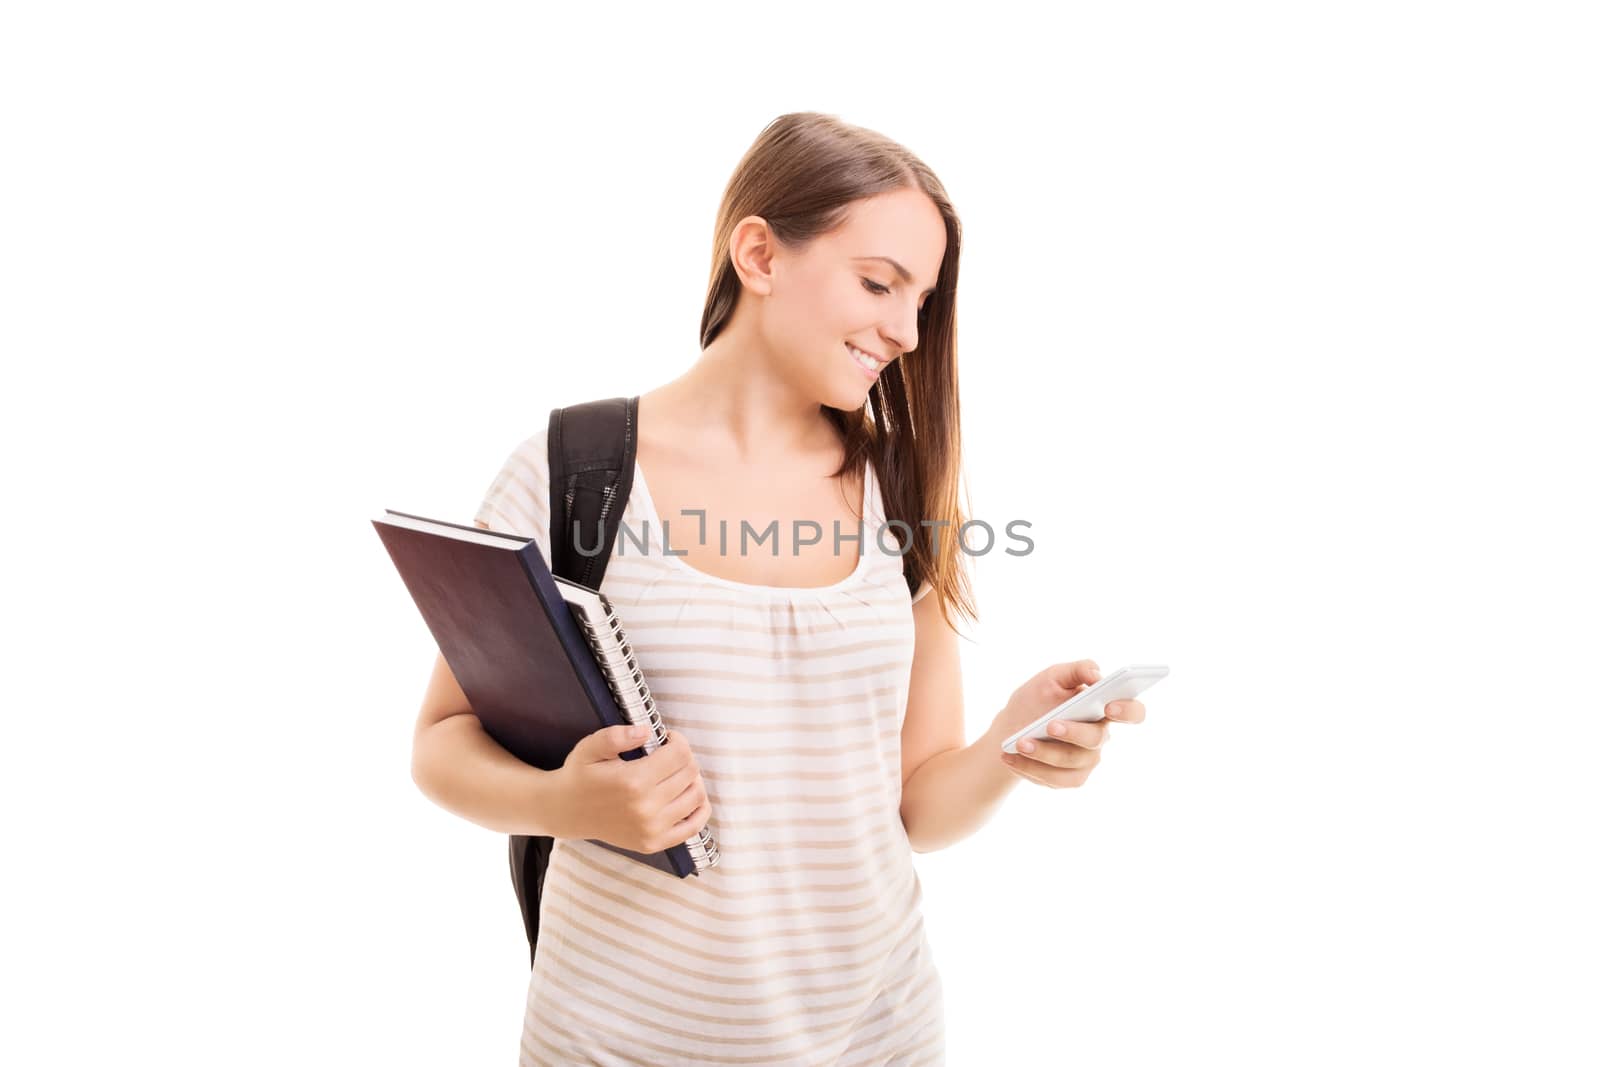 Beautiful young student girl with a backpack, holding notebooks, smiling and looking at her phone, isolated on white background.